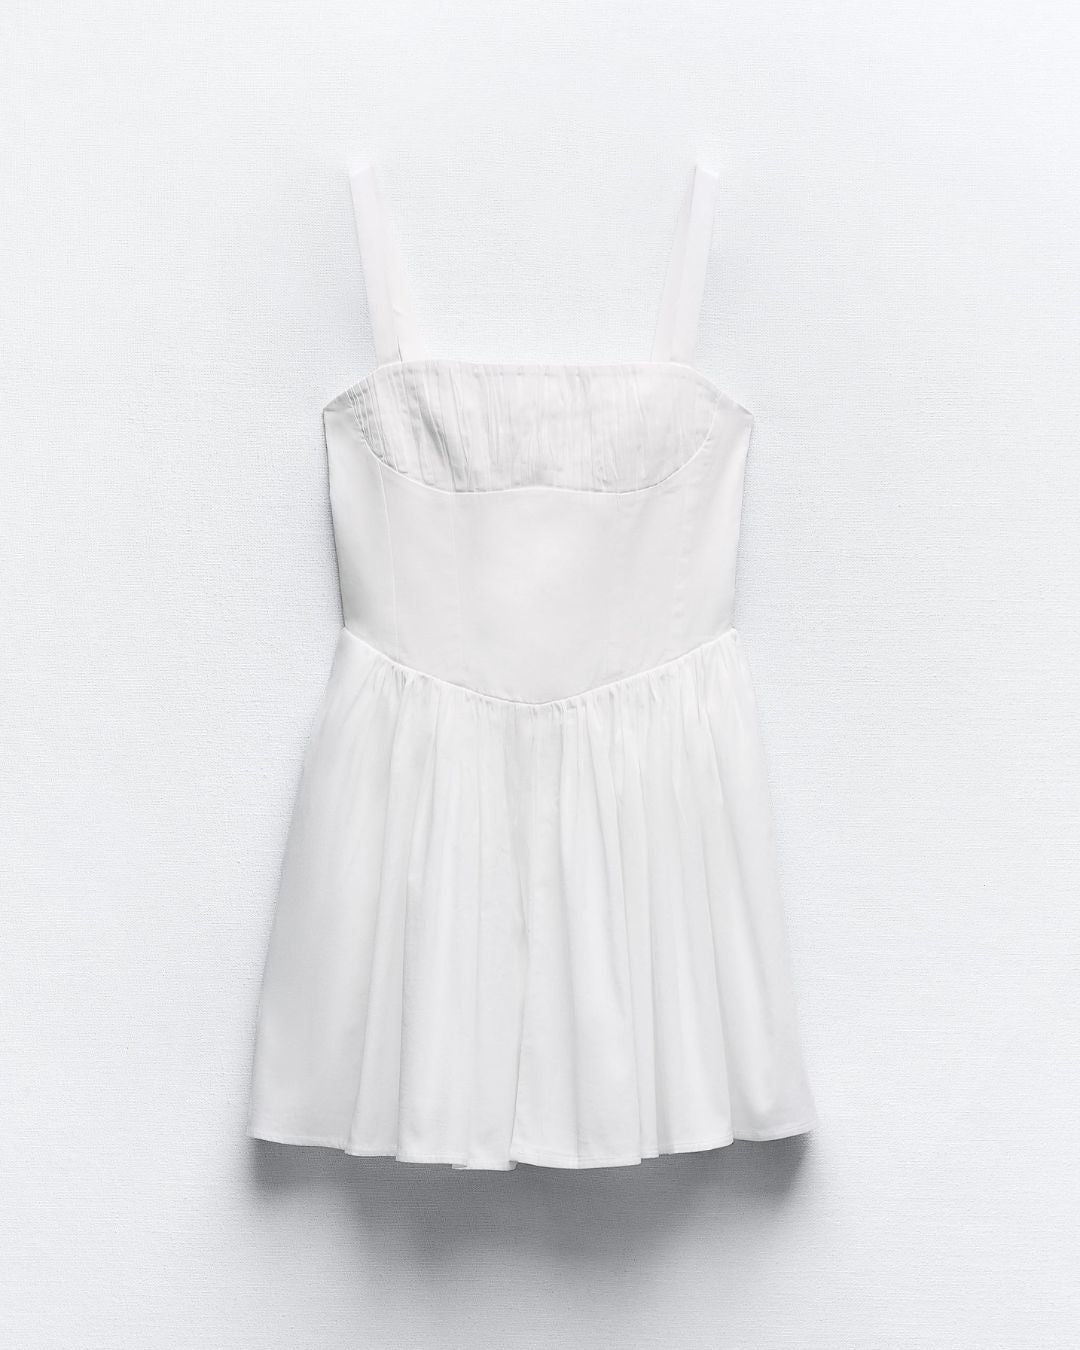 TAILORED FIT AND FLARE DRESS,dresses, fit and flare, gathered, mini, poplin, regular fit, shoulder strap, sleeveless, soft girl, solid, square neck, vacation, white, woven,tailored-fit-and-flare-dress-white,Color- White
Fabric- Poplin
Type- Fit And Flare
Fit- Regular Fit
Length- Mini
Neck- Square Neck
Sleeve- Sleeveless
Print- Solid
Detail- Gathered